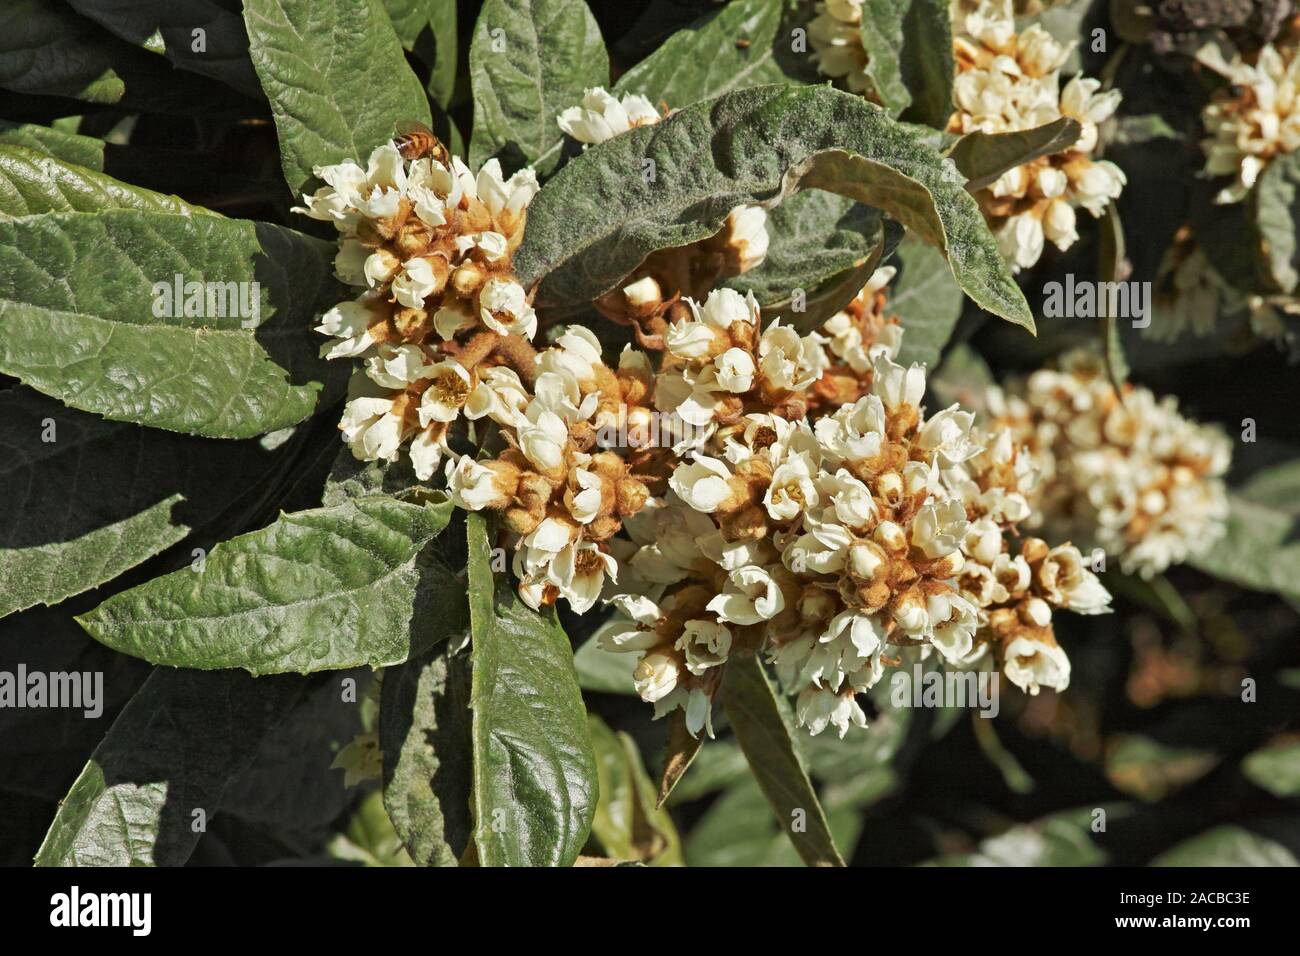 detail of the flowers and the leaves of the loquat tree Stock Photo